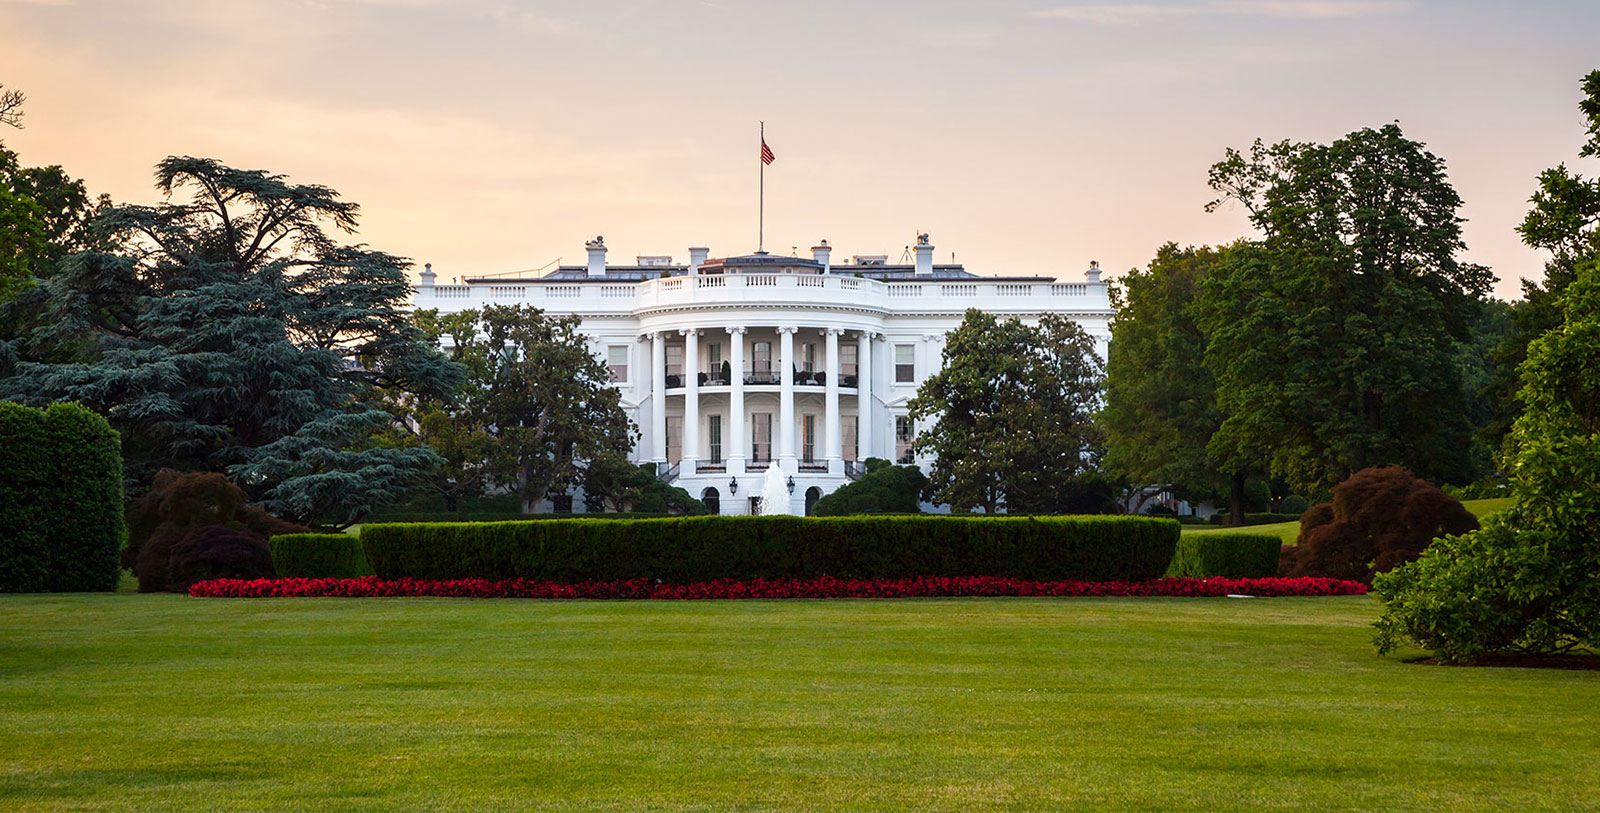 Visit the White House, the Lincoln Memorial, and the Washington Monument while out exploring the nation's capital.